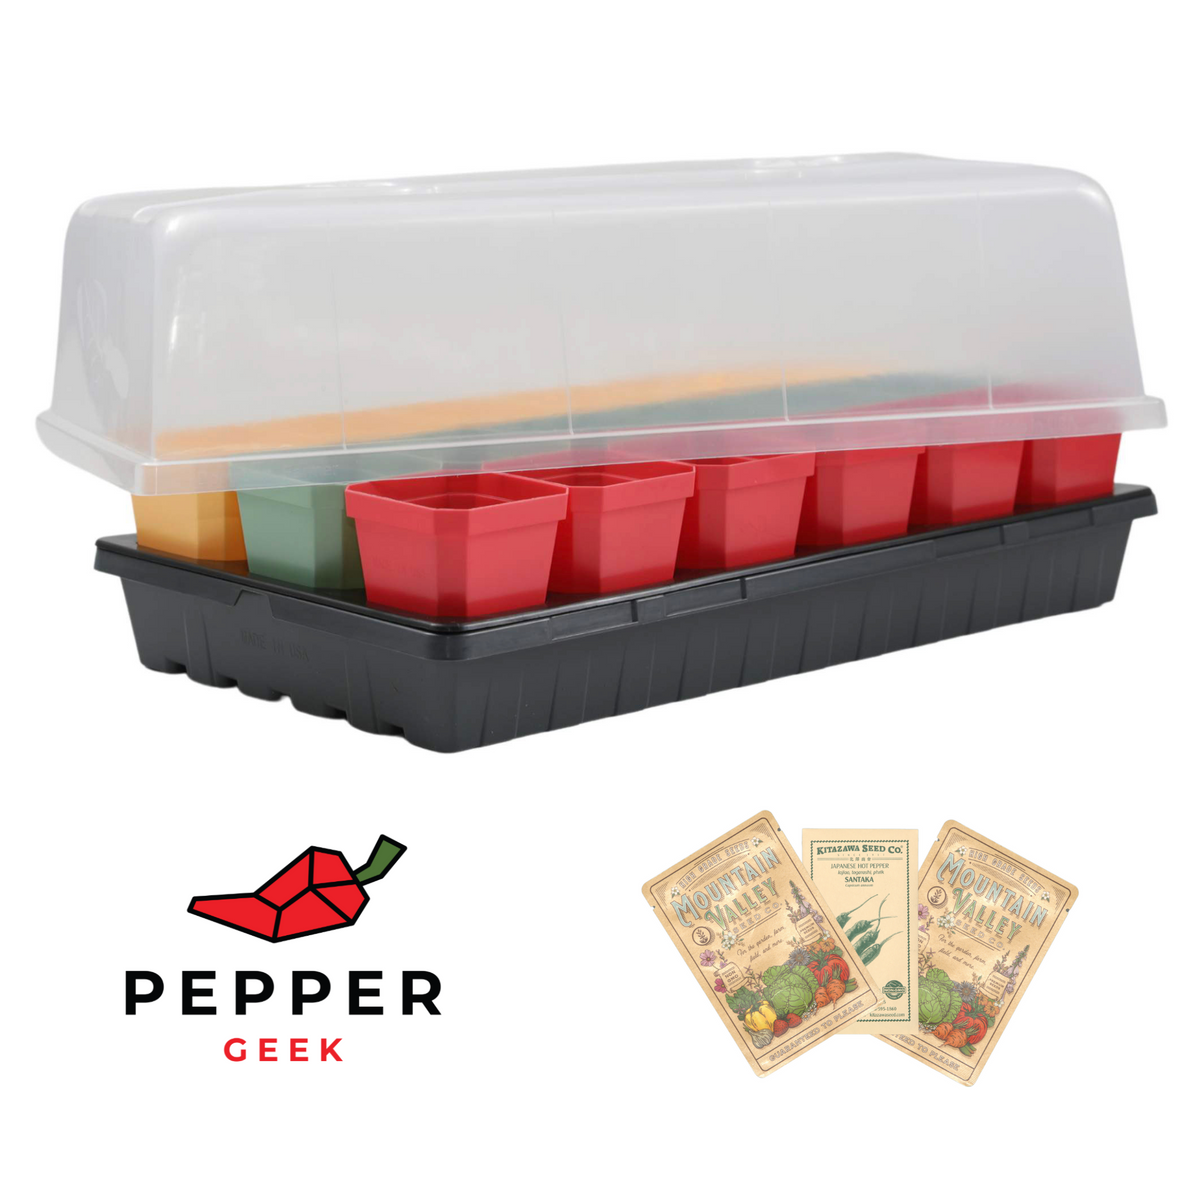 Pepper Geek branded Seed Starter Kit showing a dark grey 1020 trays with red, green, and yellow 3 inch pots under a humidity dome. Also shown are three packets of pepper seeds.  